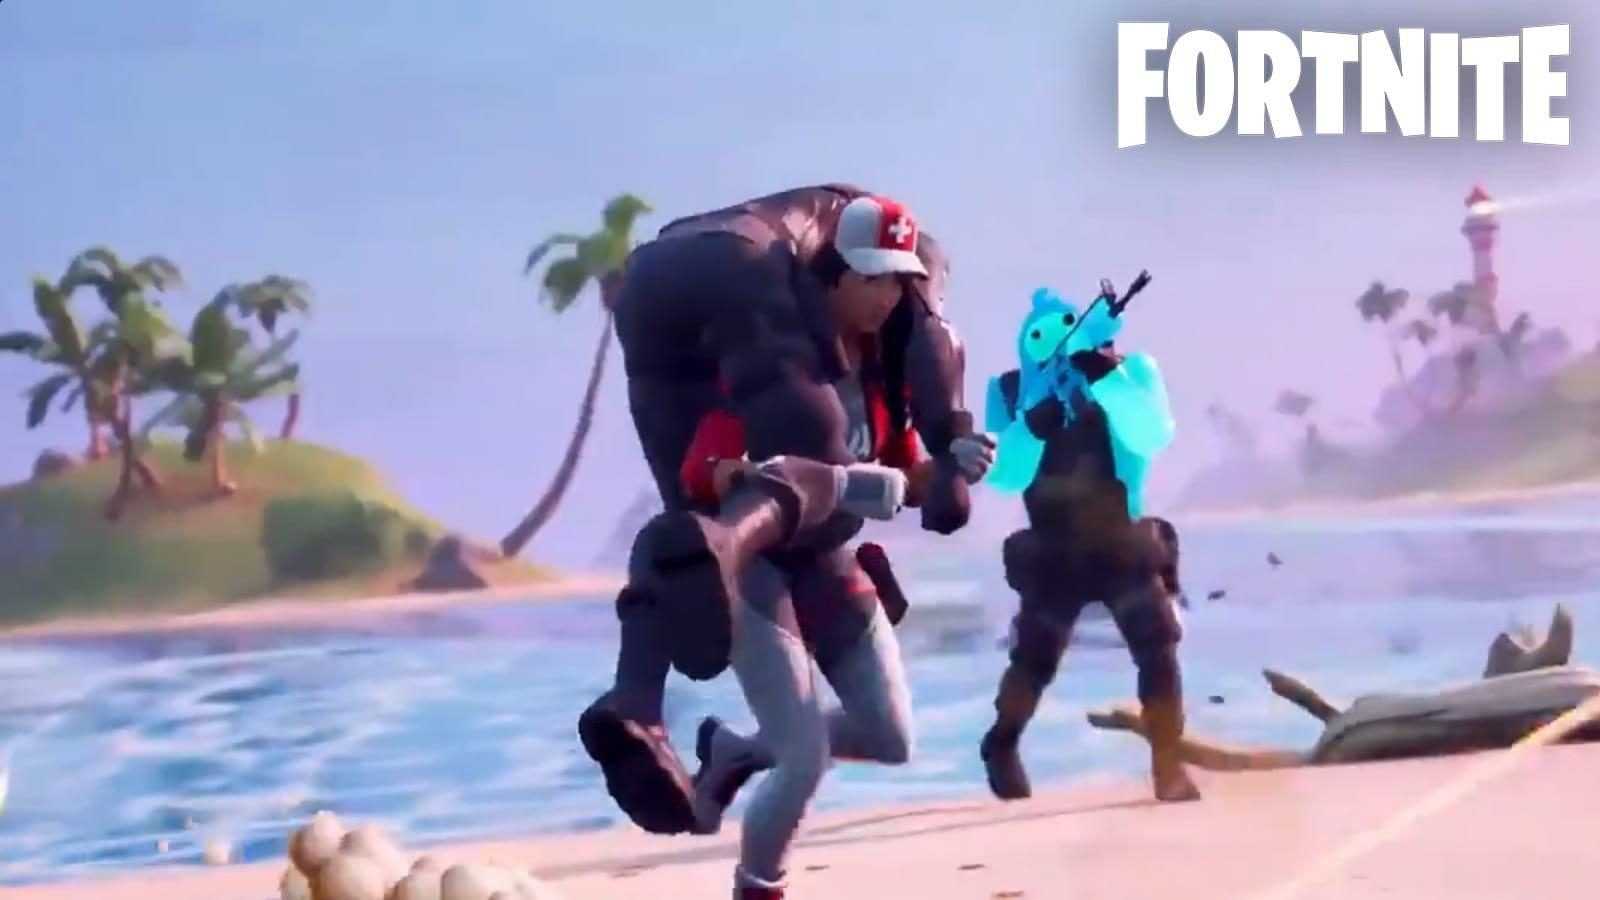 Apply Any Of those Eight Secret Strategies To enhance How to Hack to Get v Bucks on Fortnite